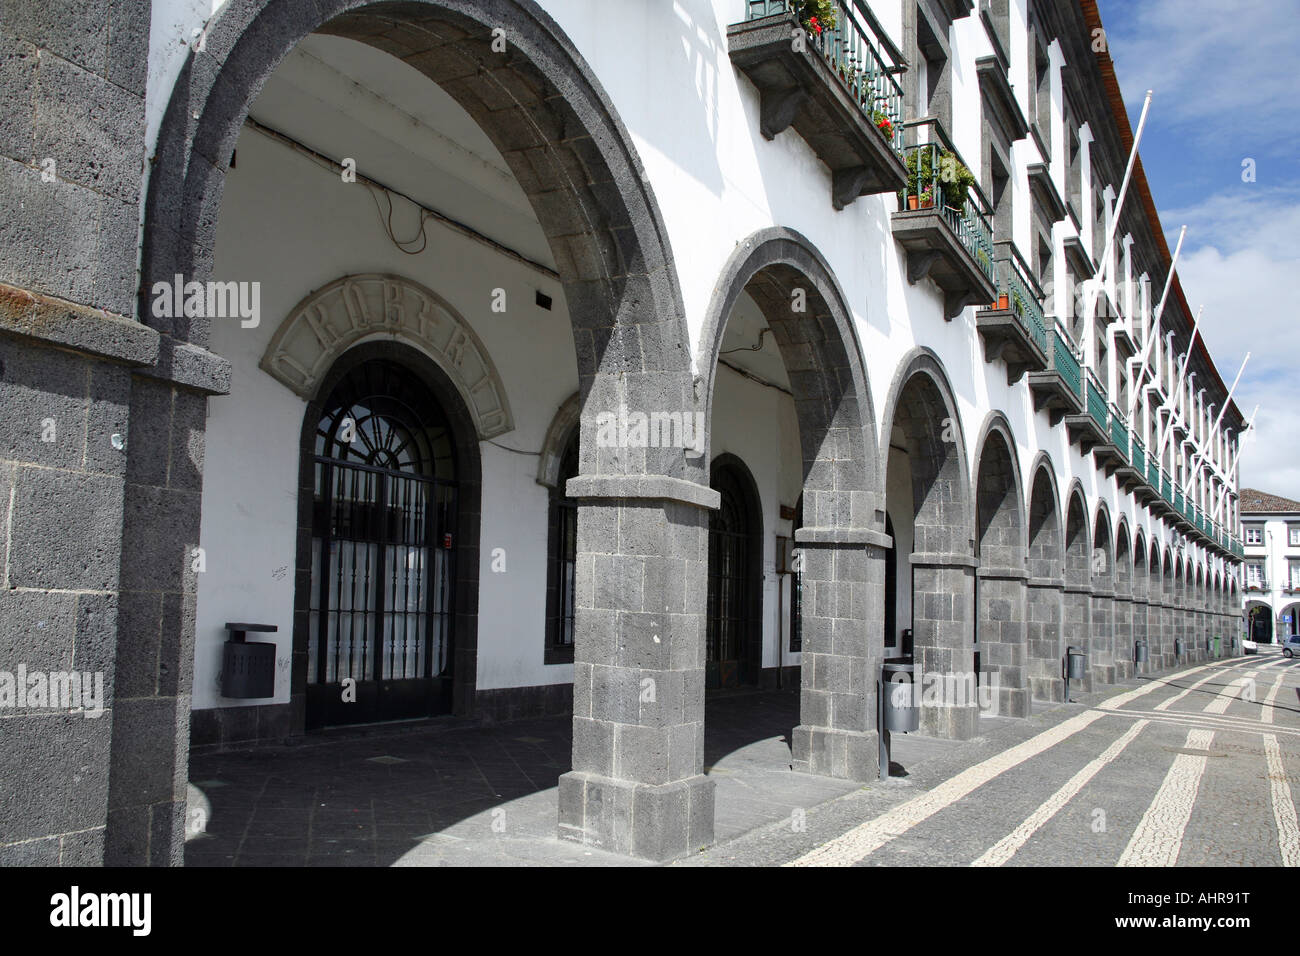 Street with arches in downtown Ponta Delgada Sao Miguel island Azores Portugal Stock Photo